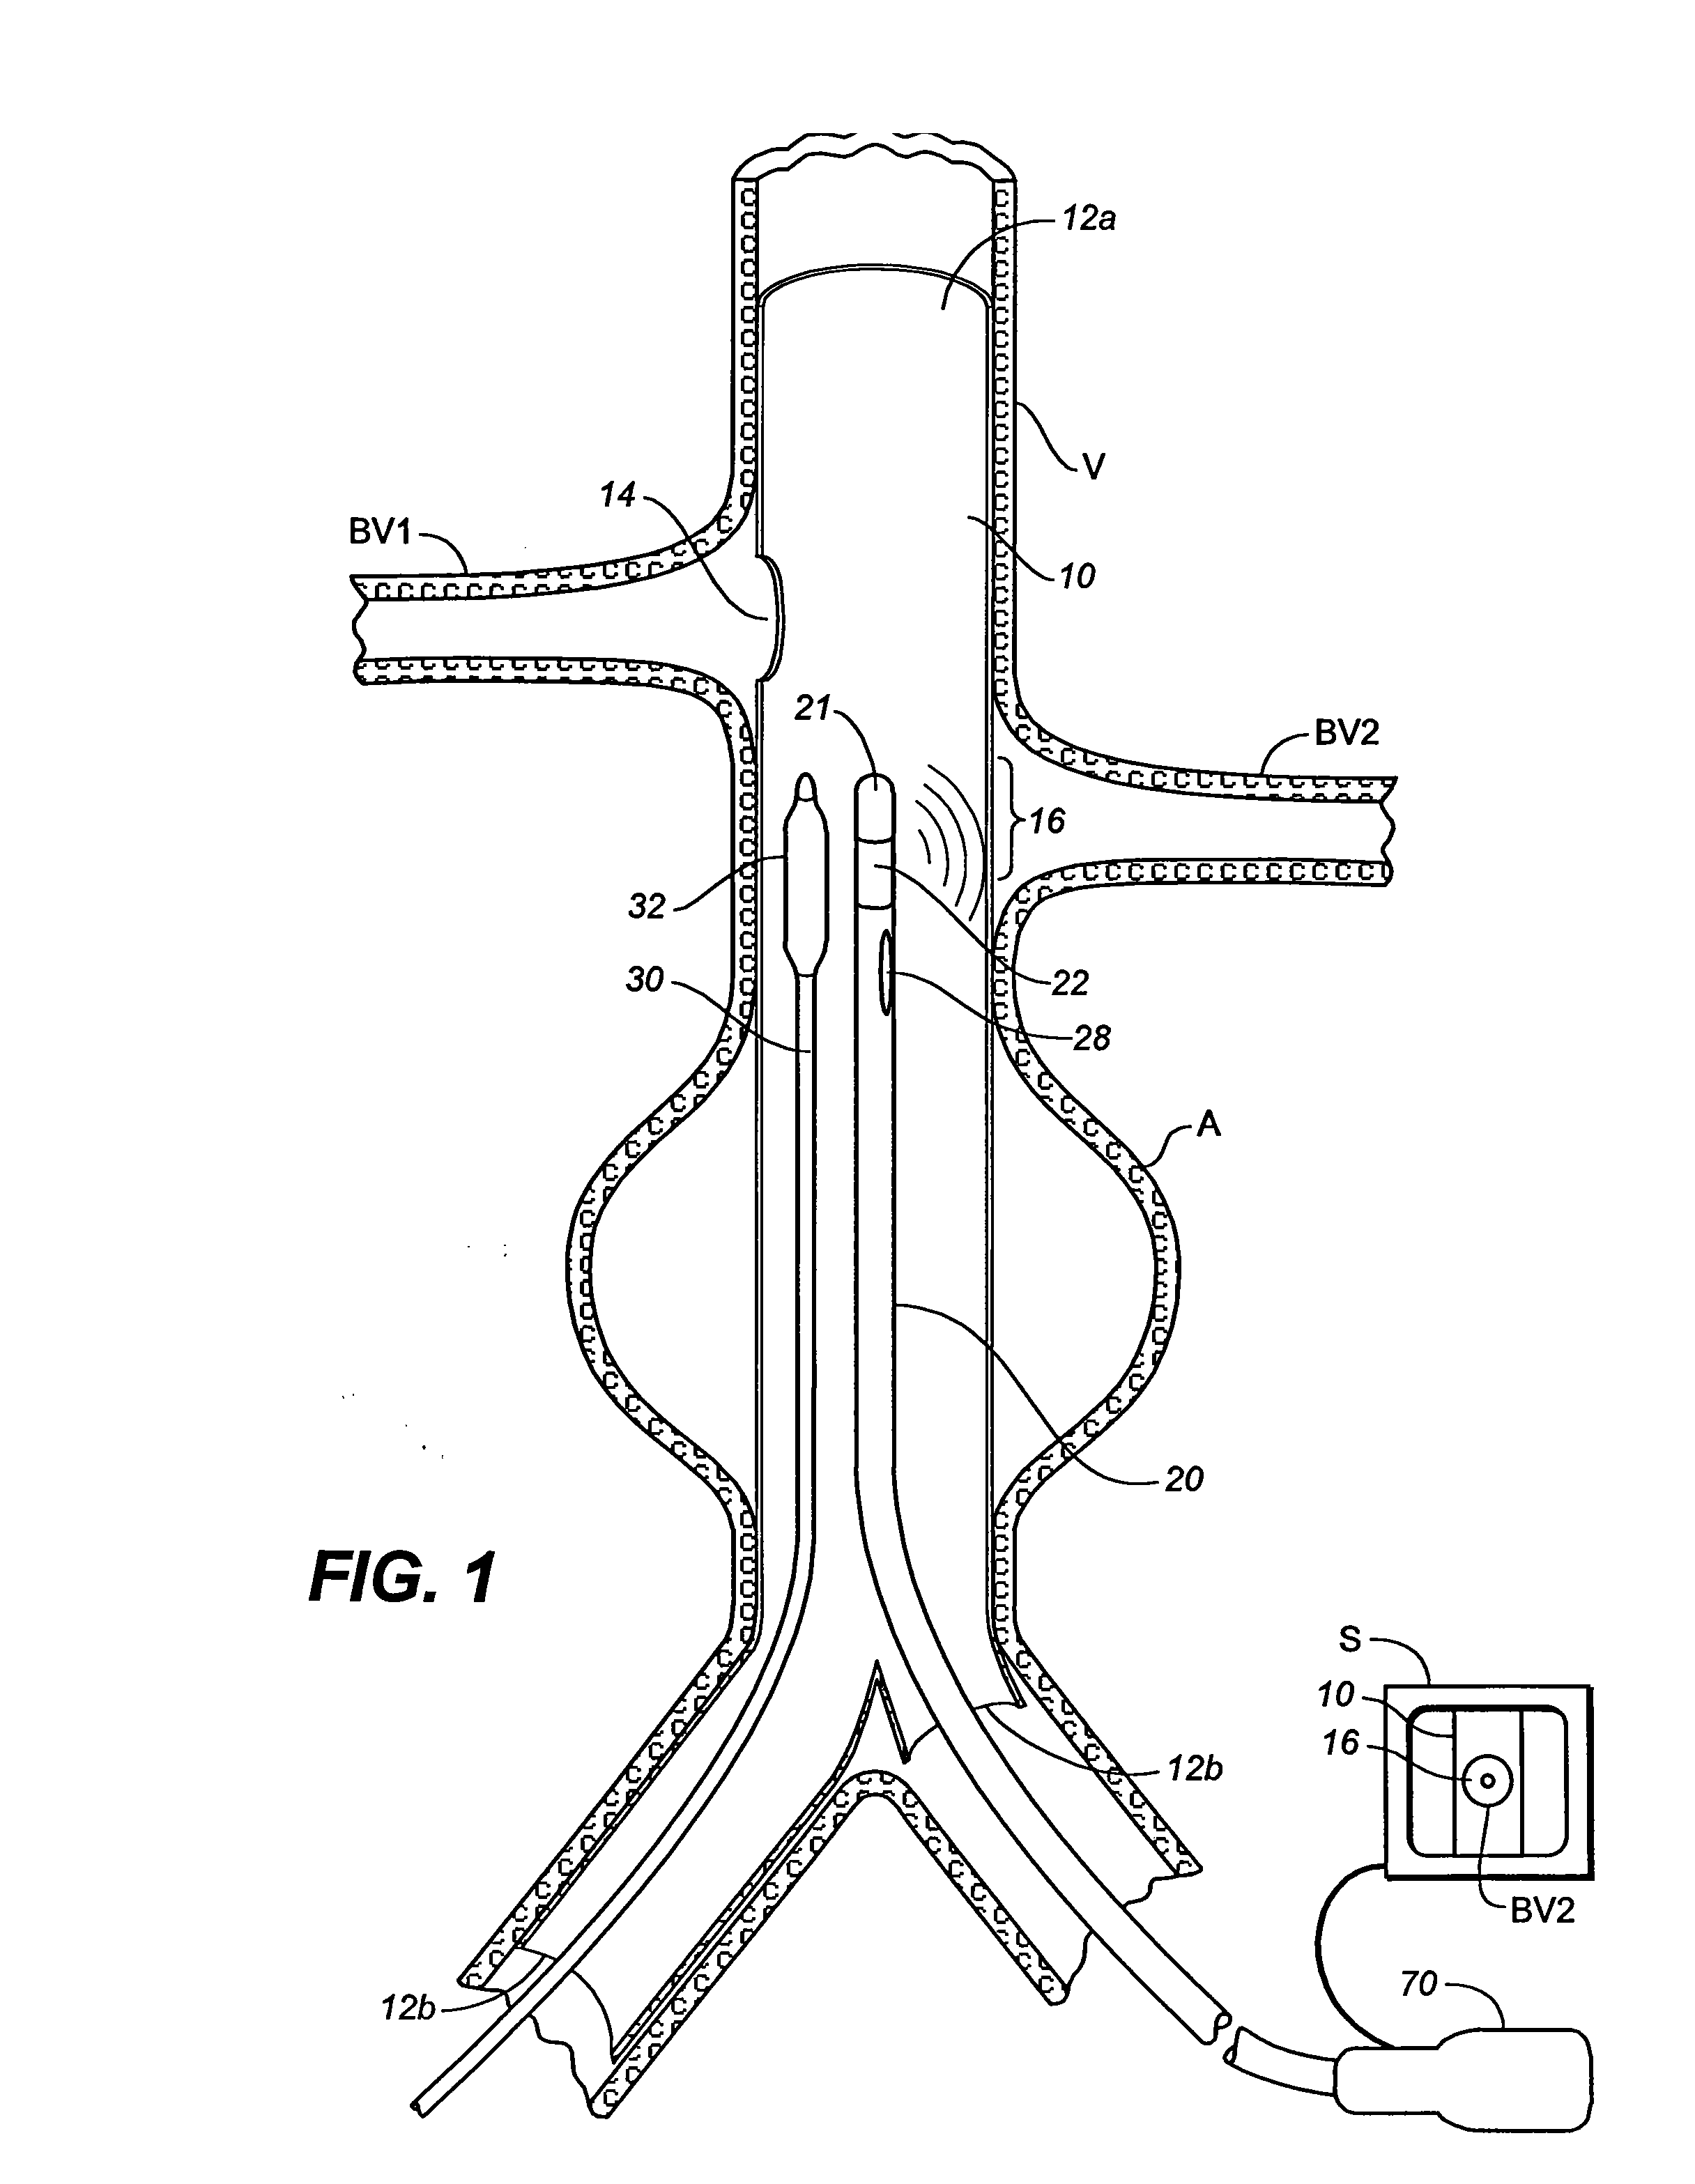 Multiple Branch Tubular Prosthesis and Methods